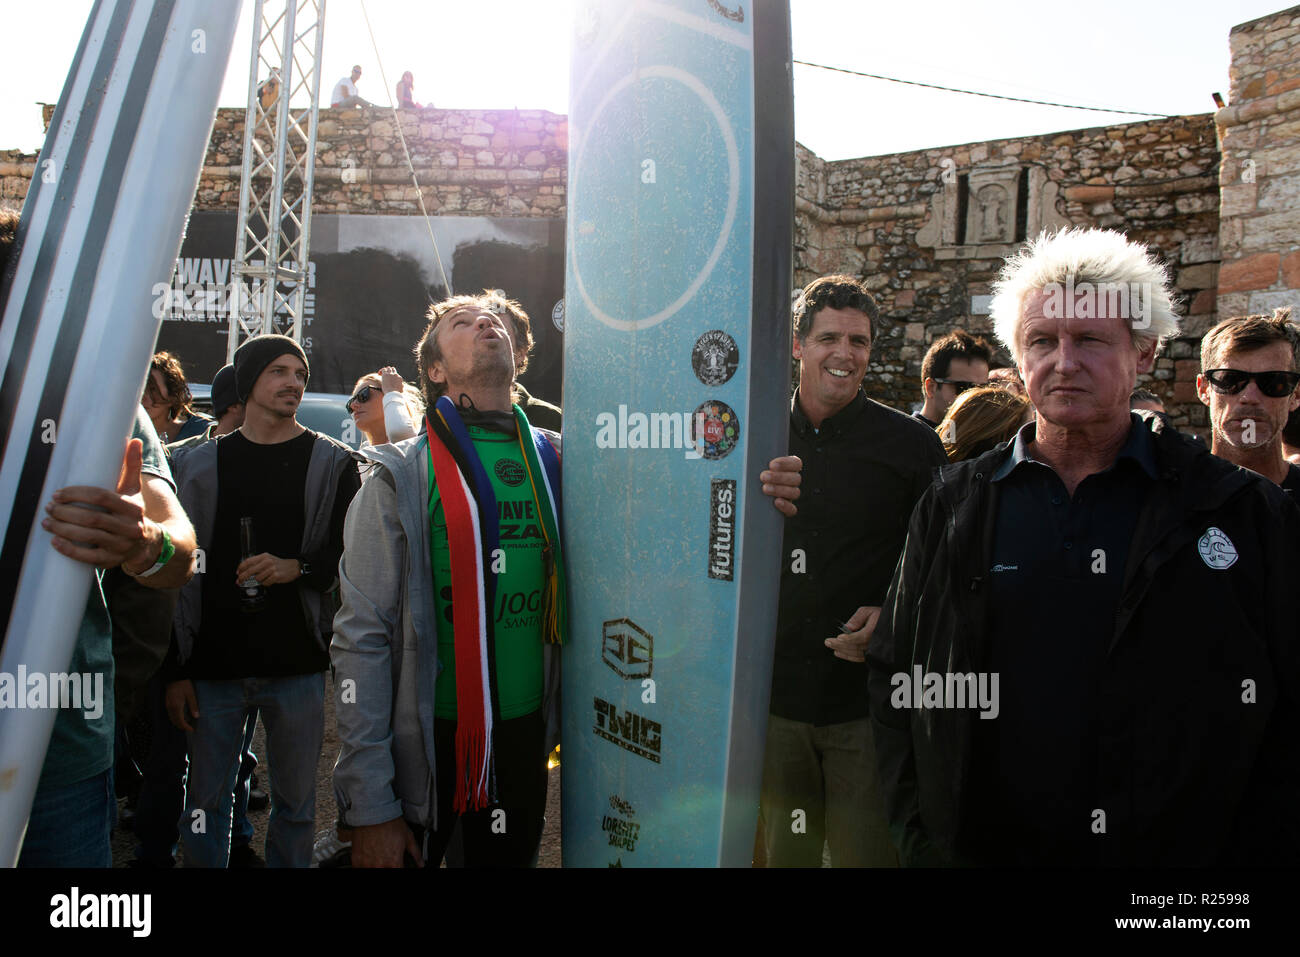 Big wave surfer Grant Baker (ZAF)  (2nd L) is seen before receiving the first winner prize at the Nazare Challenge, Portugal. The first stage (Nazaré Challenge) of the World Surf League (WSL) Big Wave Tour took place in Nazaré, Portugal. South African surfer Grant Baker won the Portuguese competition. Stock Photo